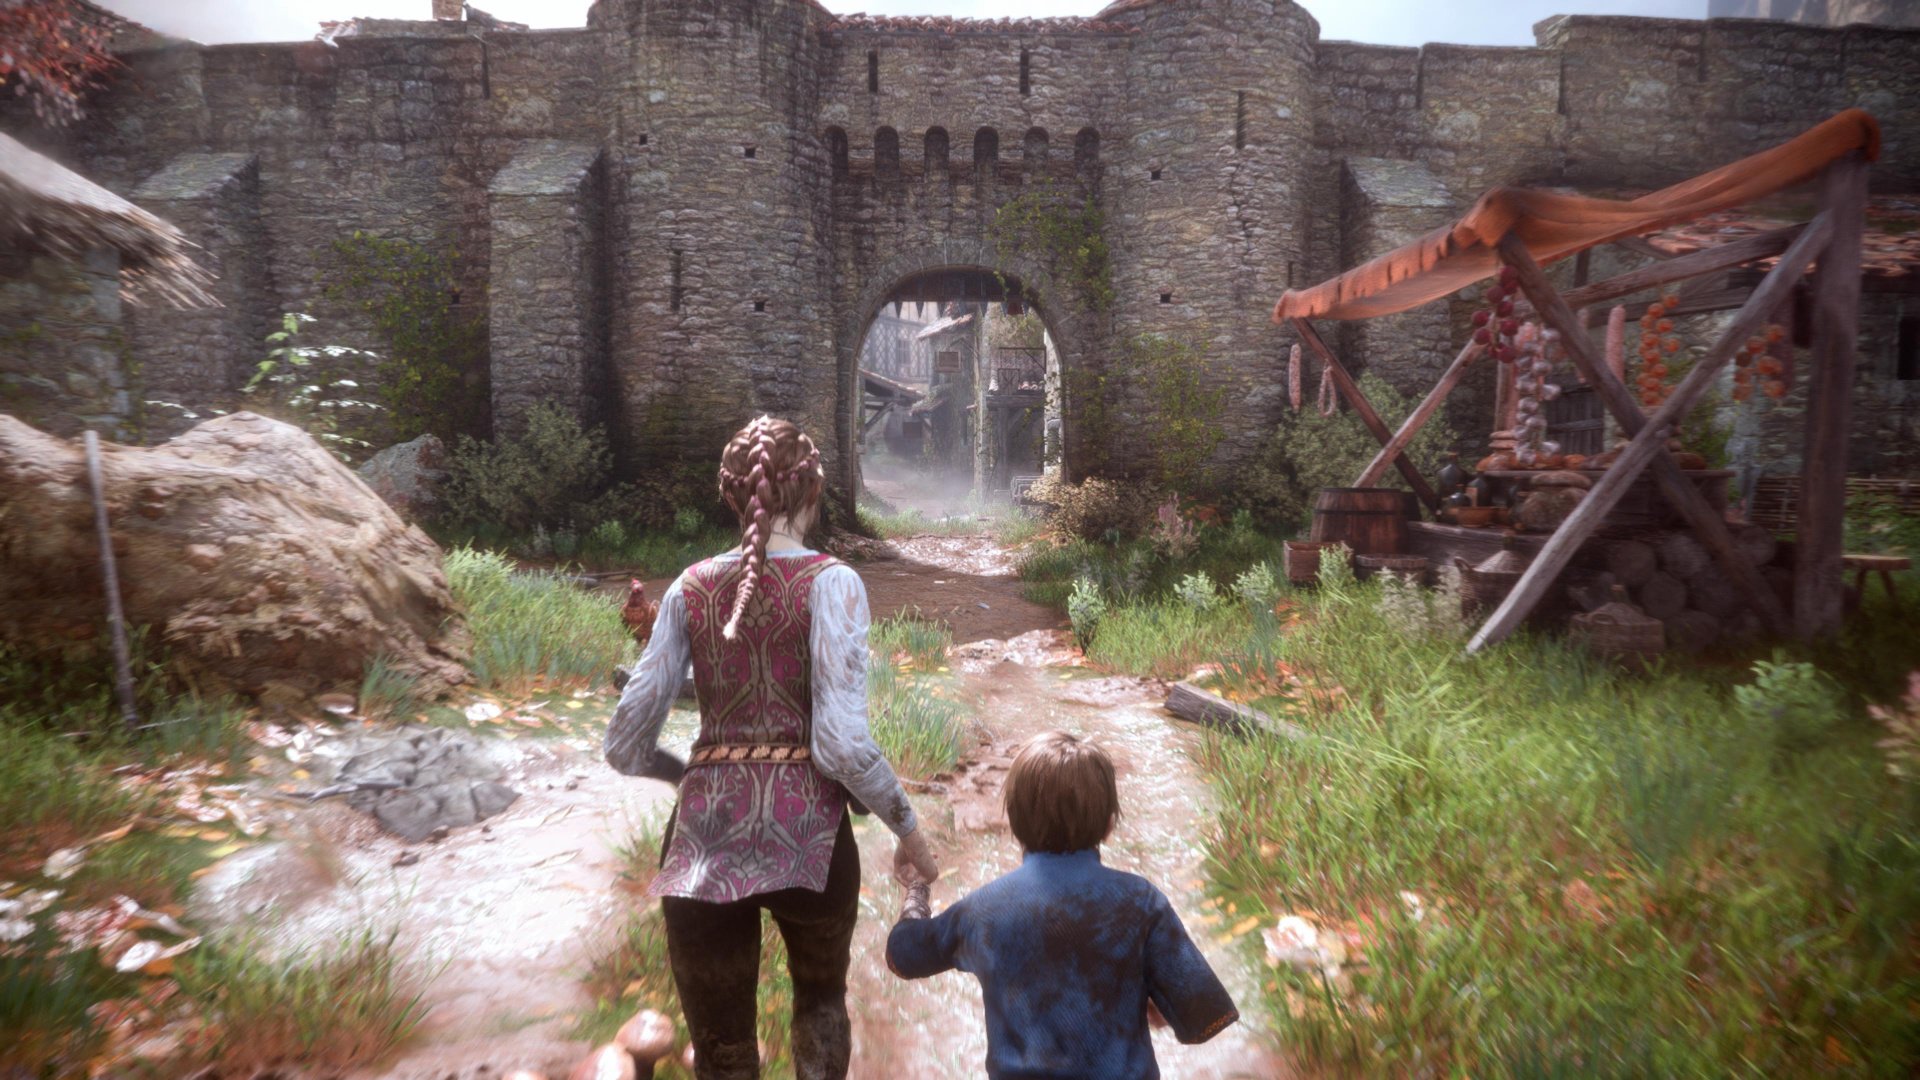 REVIEW: A Plague Tale: Innocence